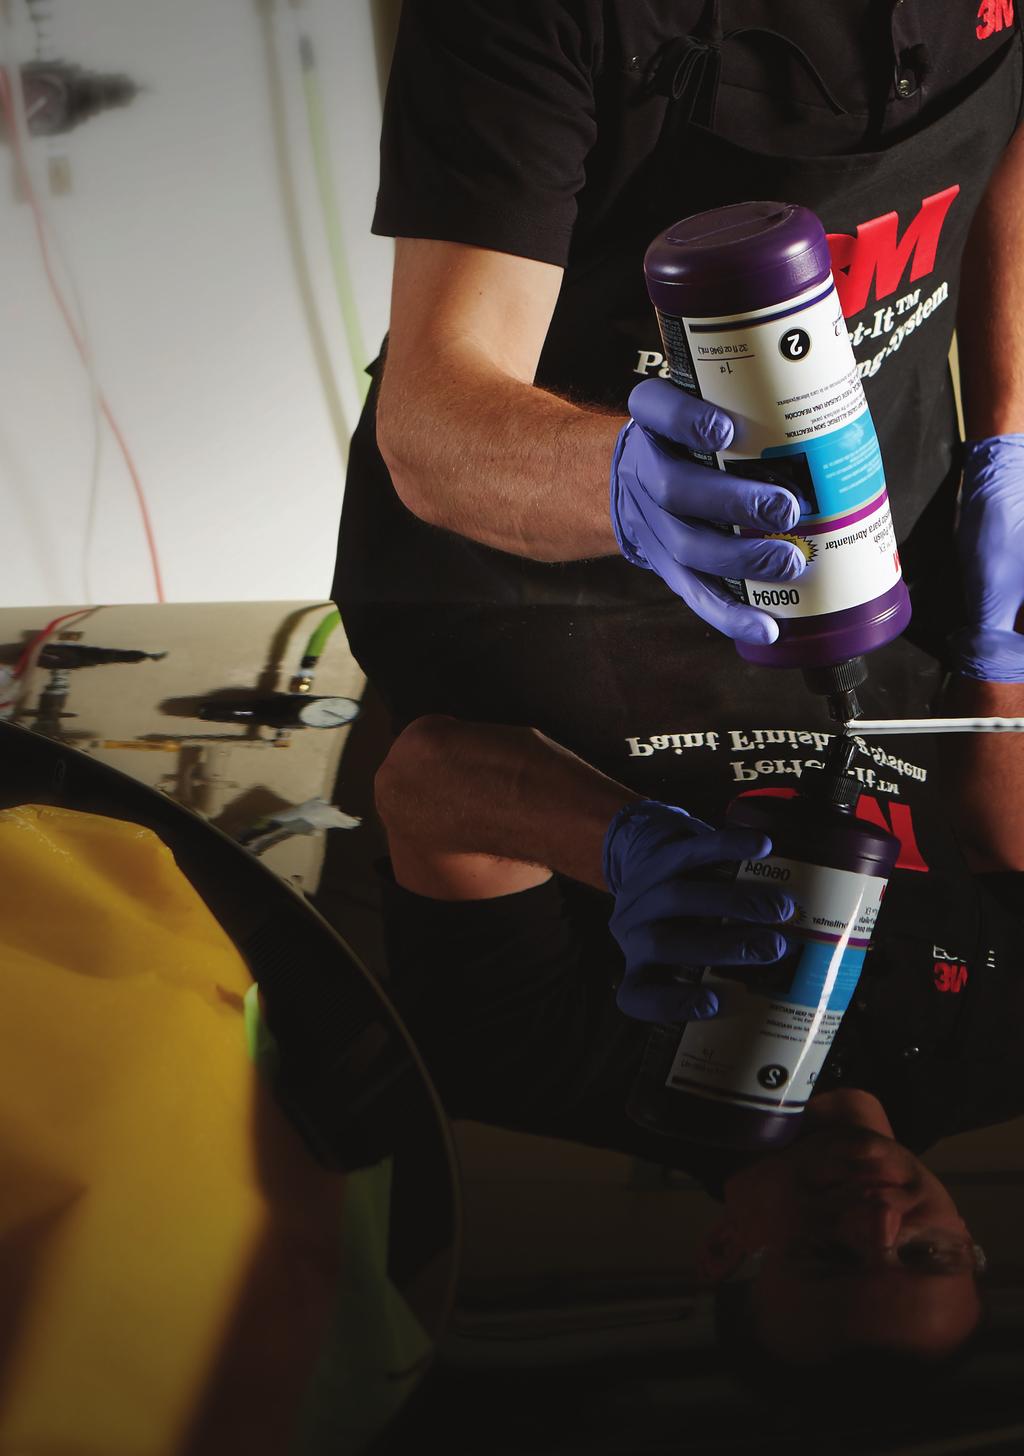 Achieving a perfect paint finish has never been easier. When you need the best results, use 3M Perfect-It EX Paint Finishing System for optimal performance every time.